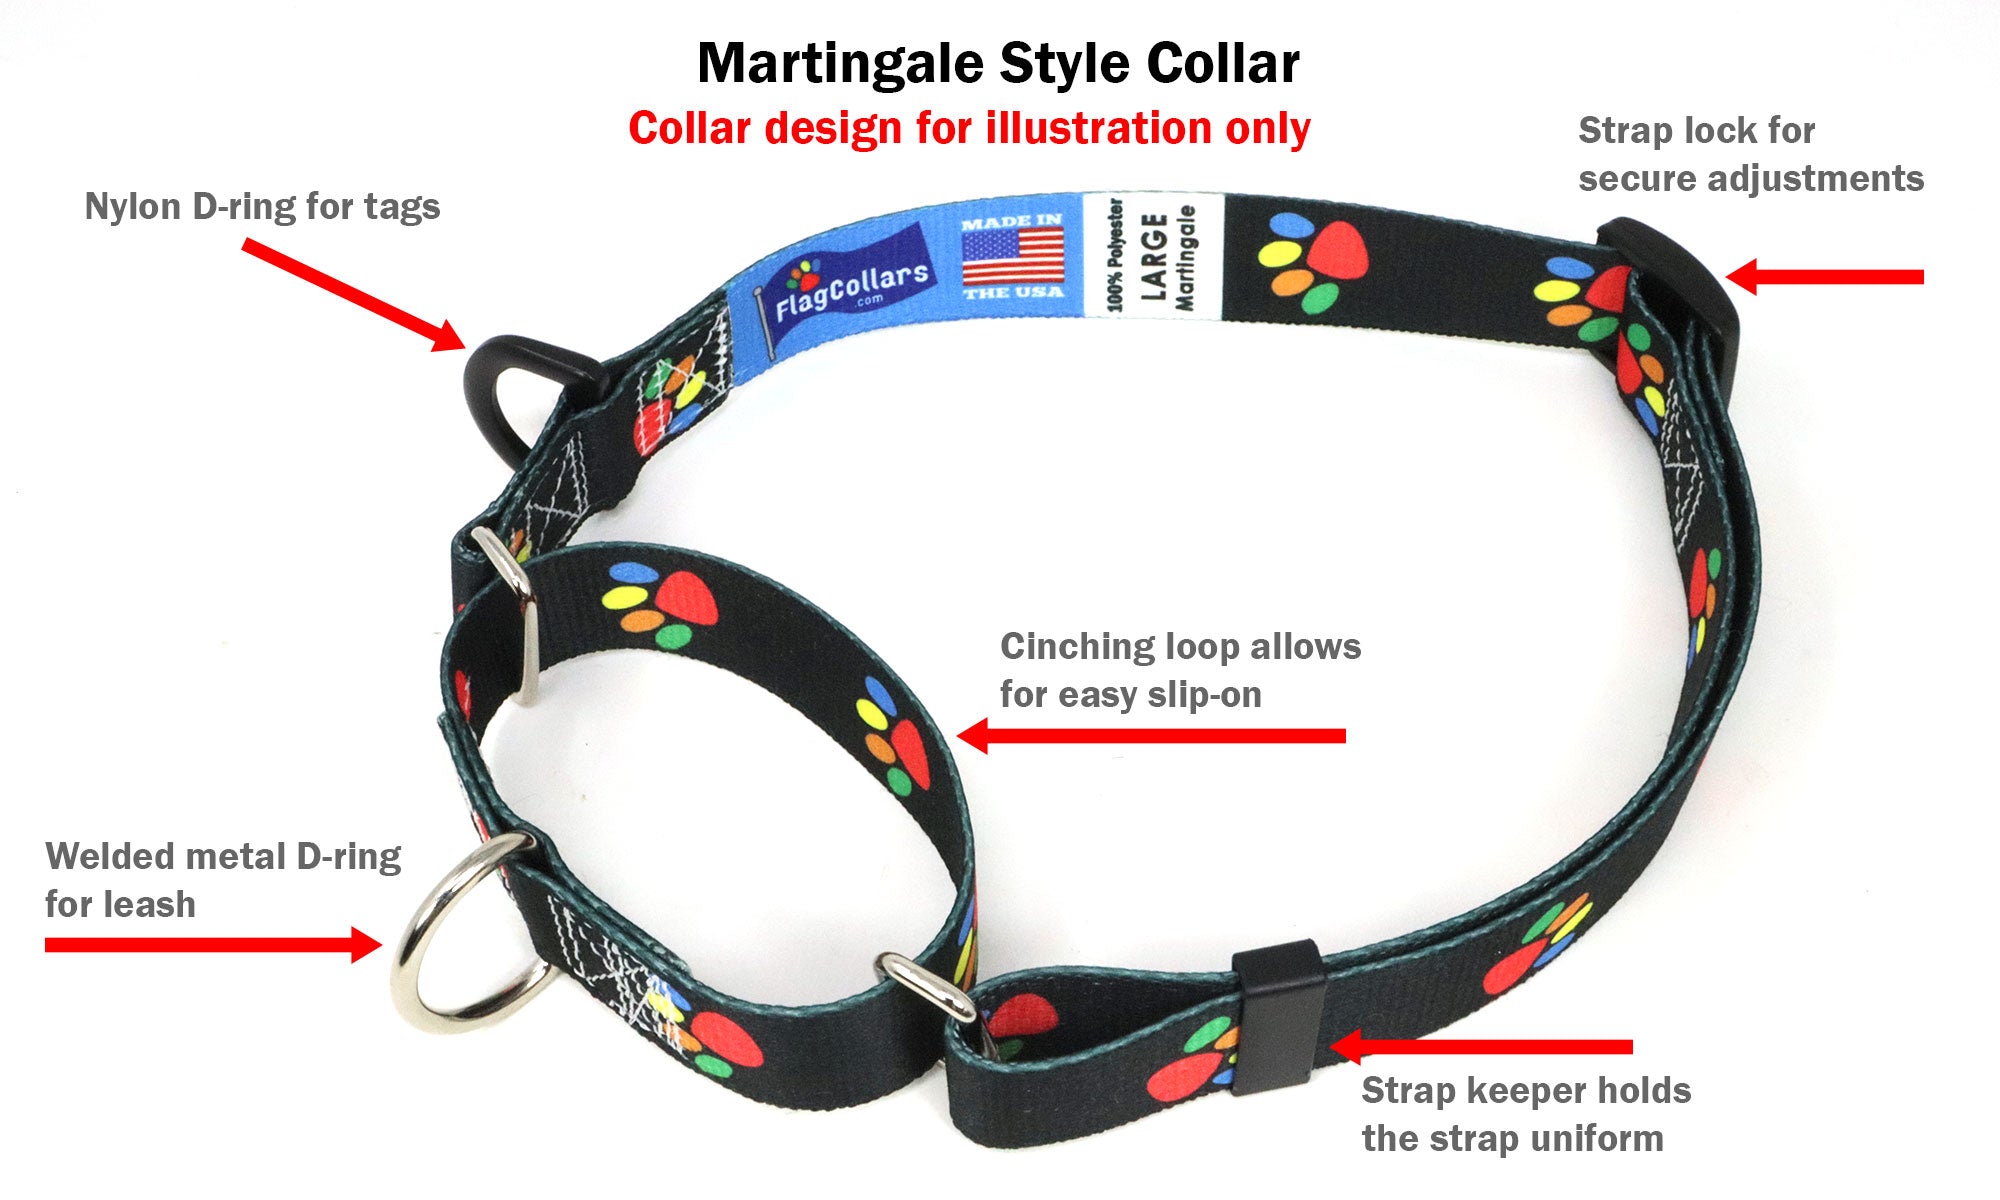 Mongolia Dog Collar | Quick Release or Martingale Style | Made in NJ, USA